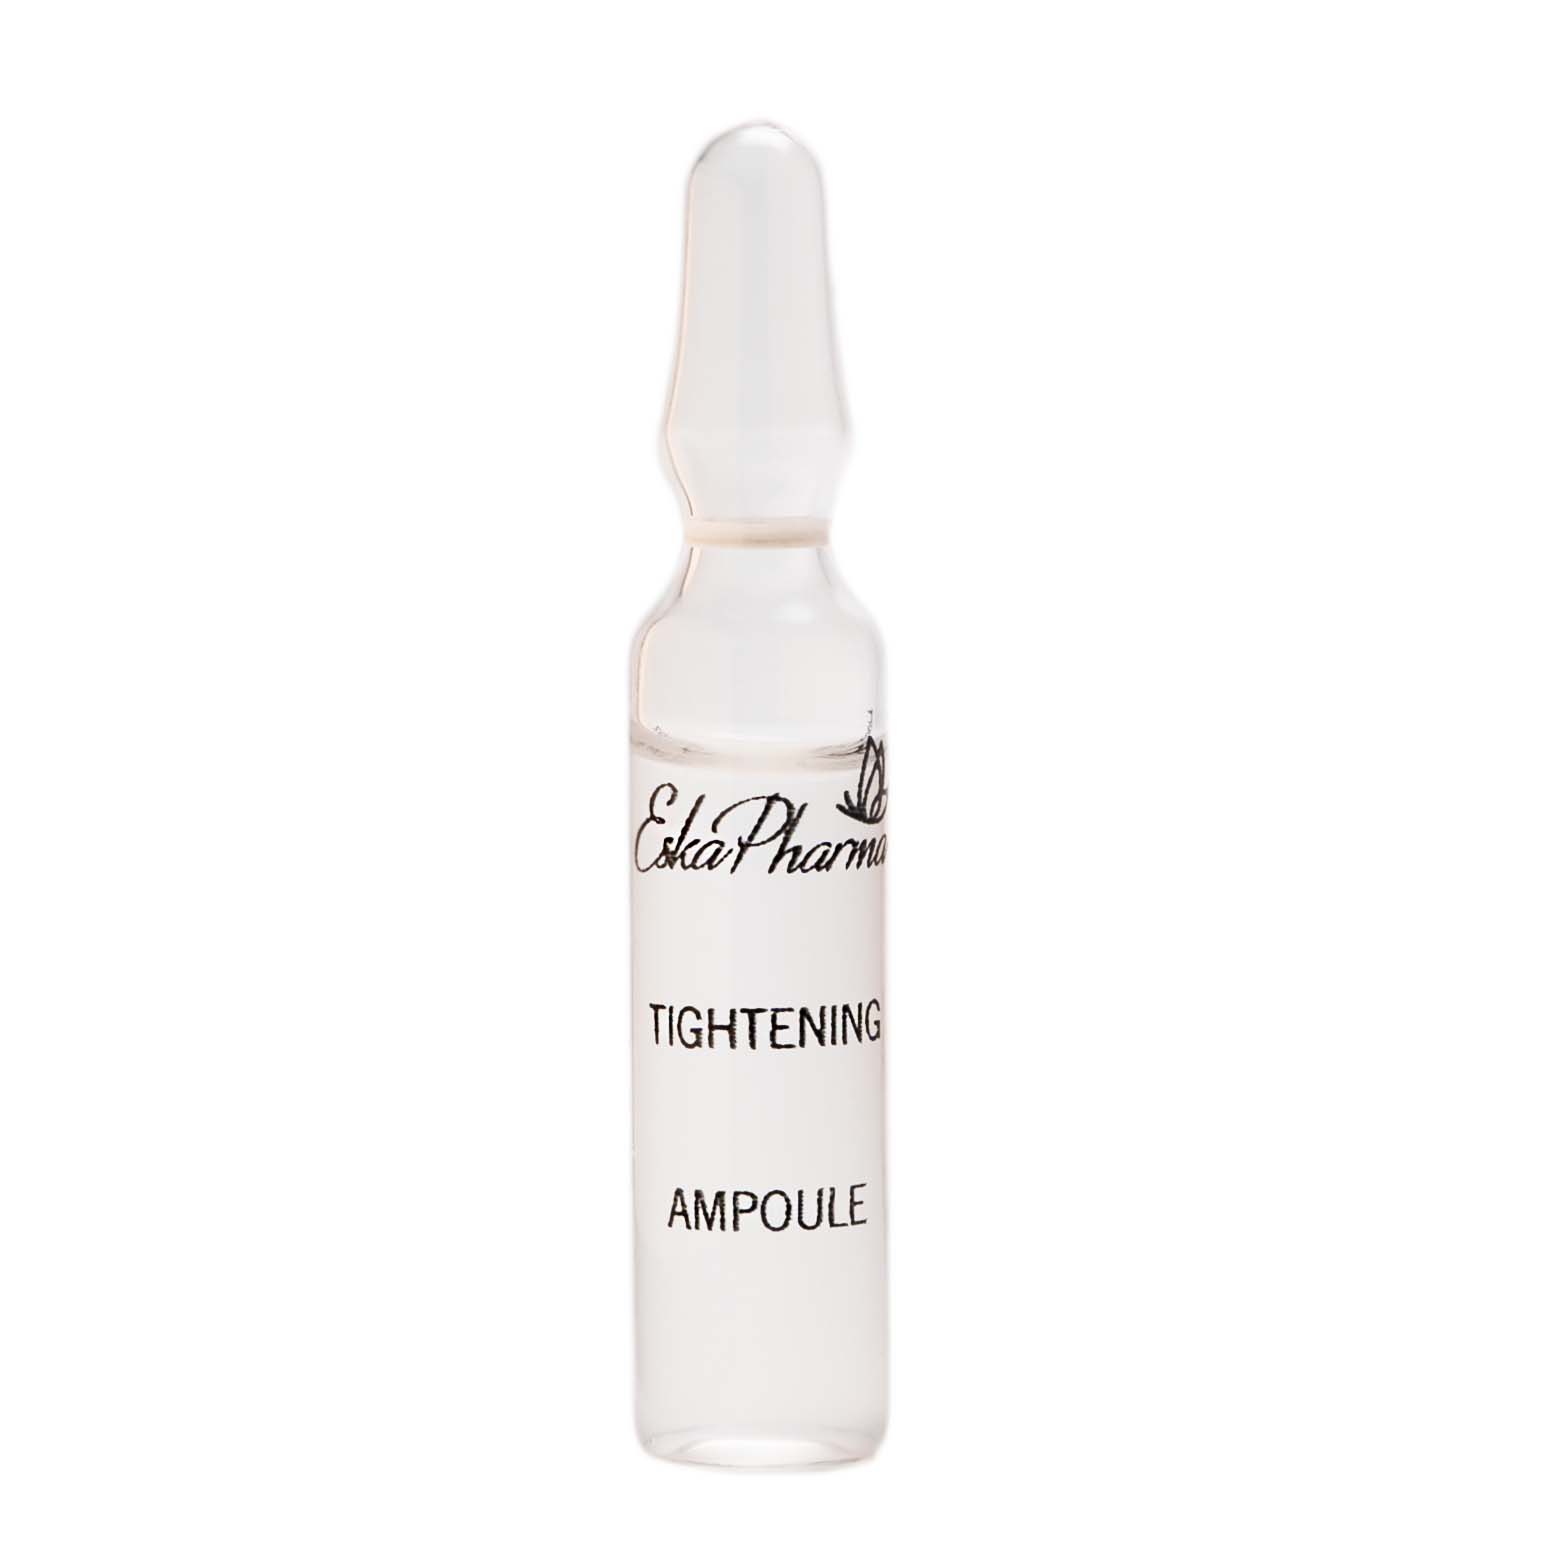 Tightening Ampoule